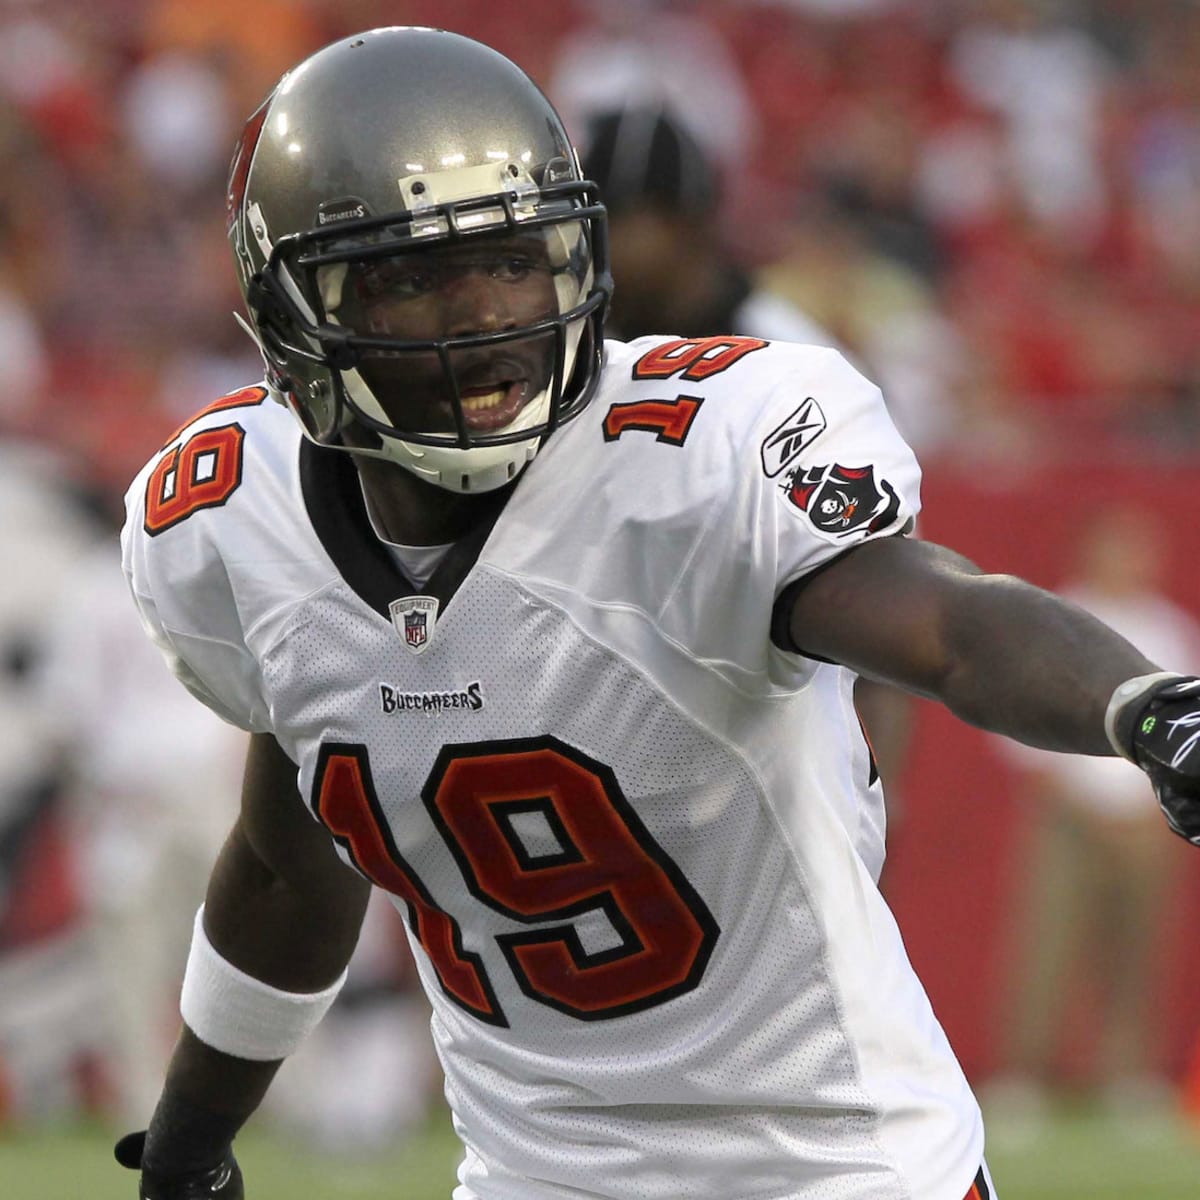 Report: Former Buccaneer Mike Williams' Death Is Under